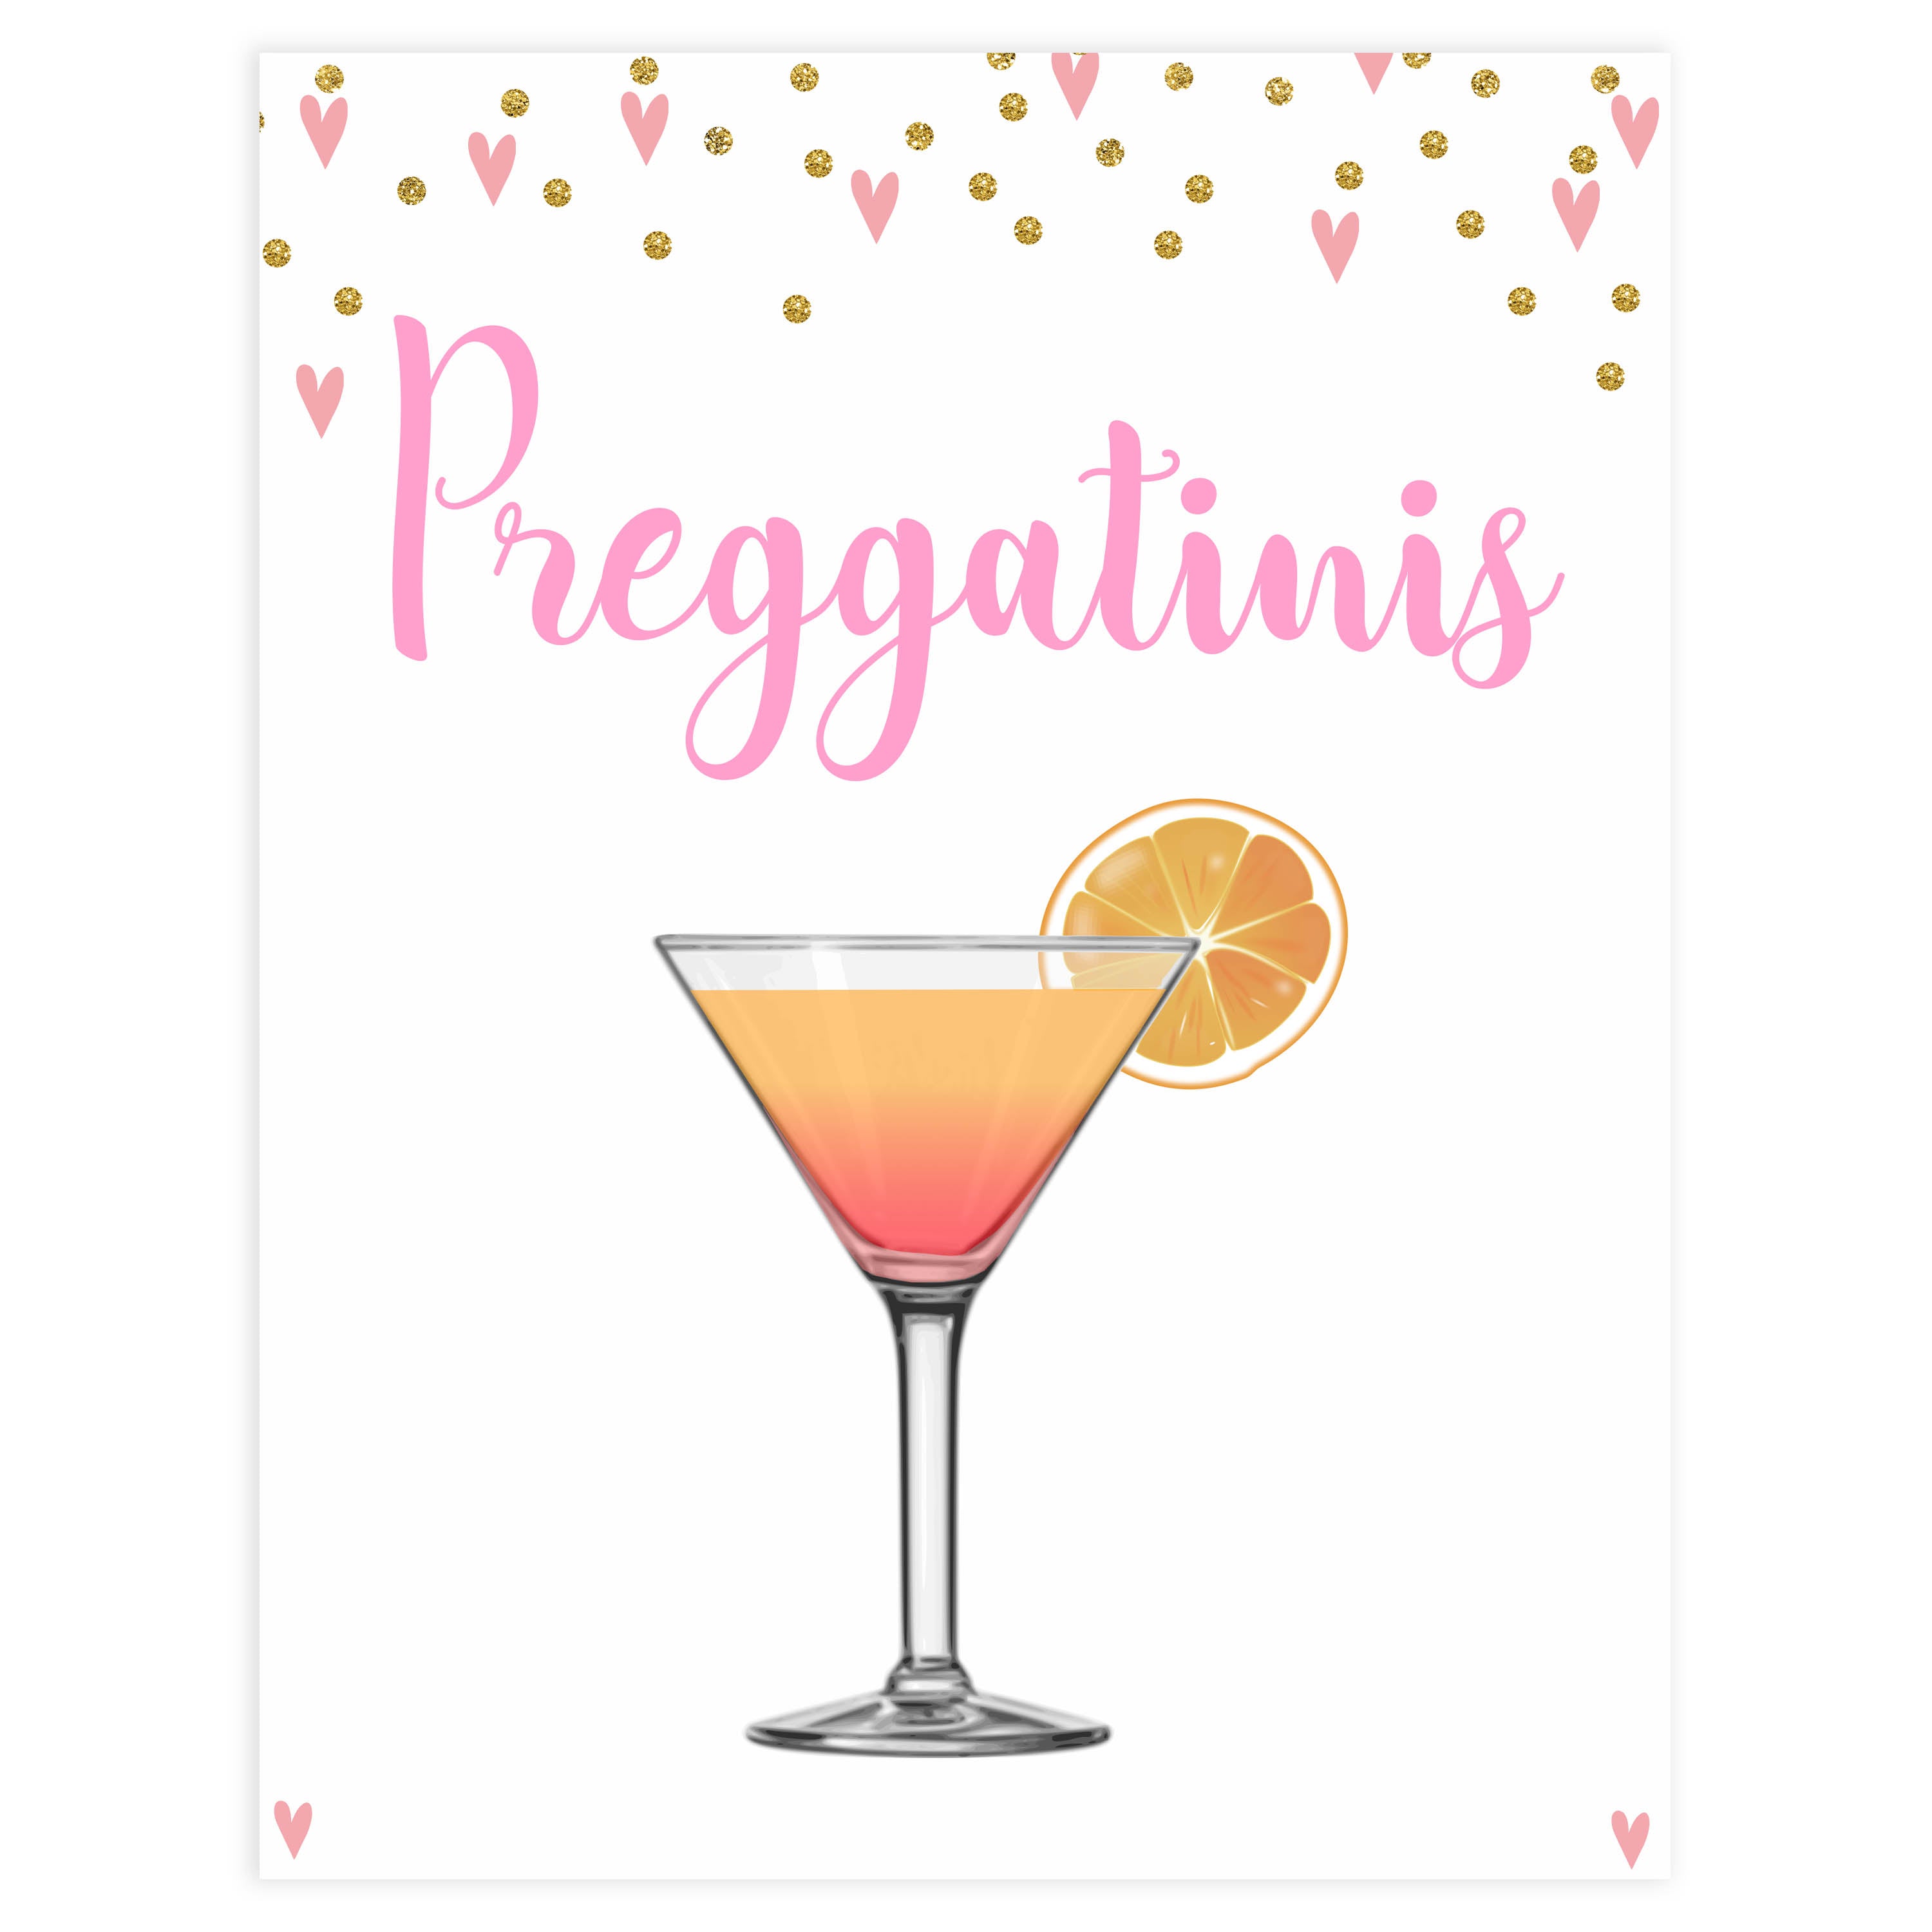 preggatinis baby signs, preggatinis baby table signs, Pink hearts baby decor, printable baby table signs, printable baby decor, gold glitter table signs, fun baby signs, pink hearts fun baby table signs